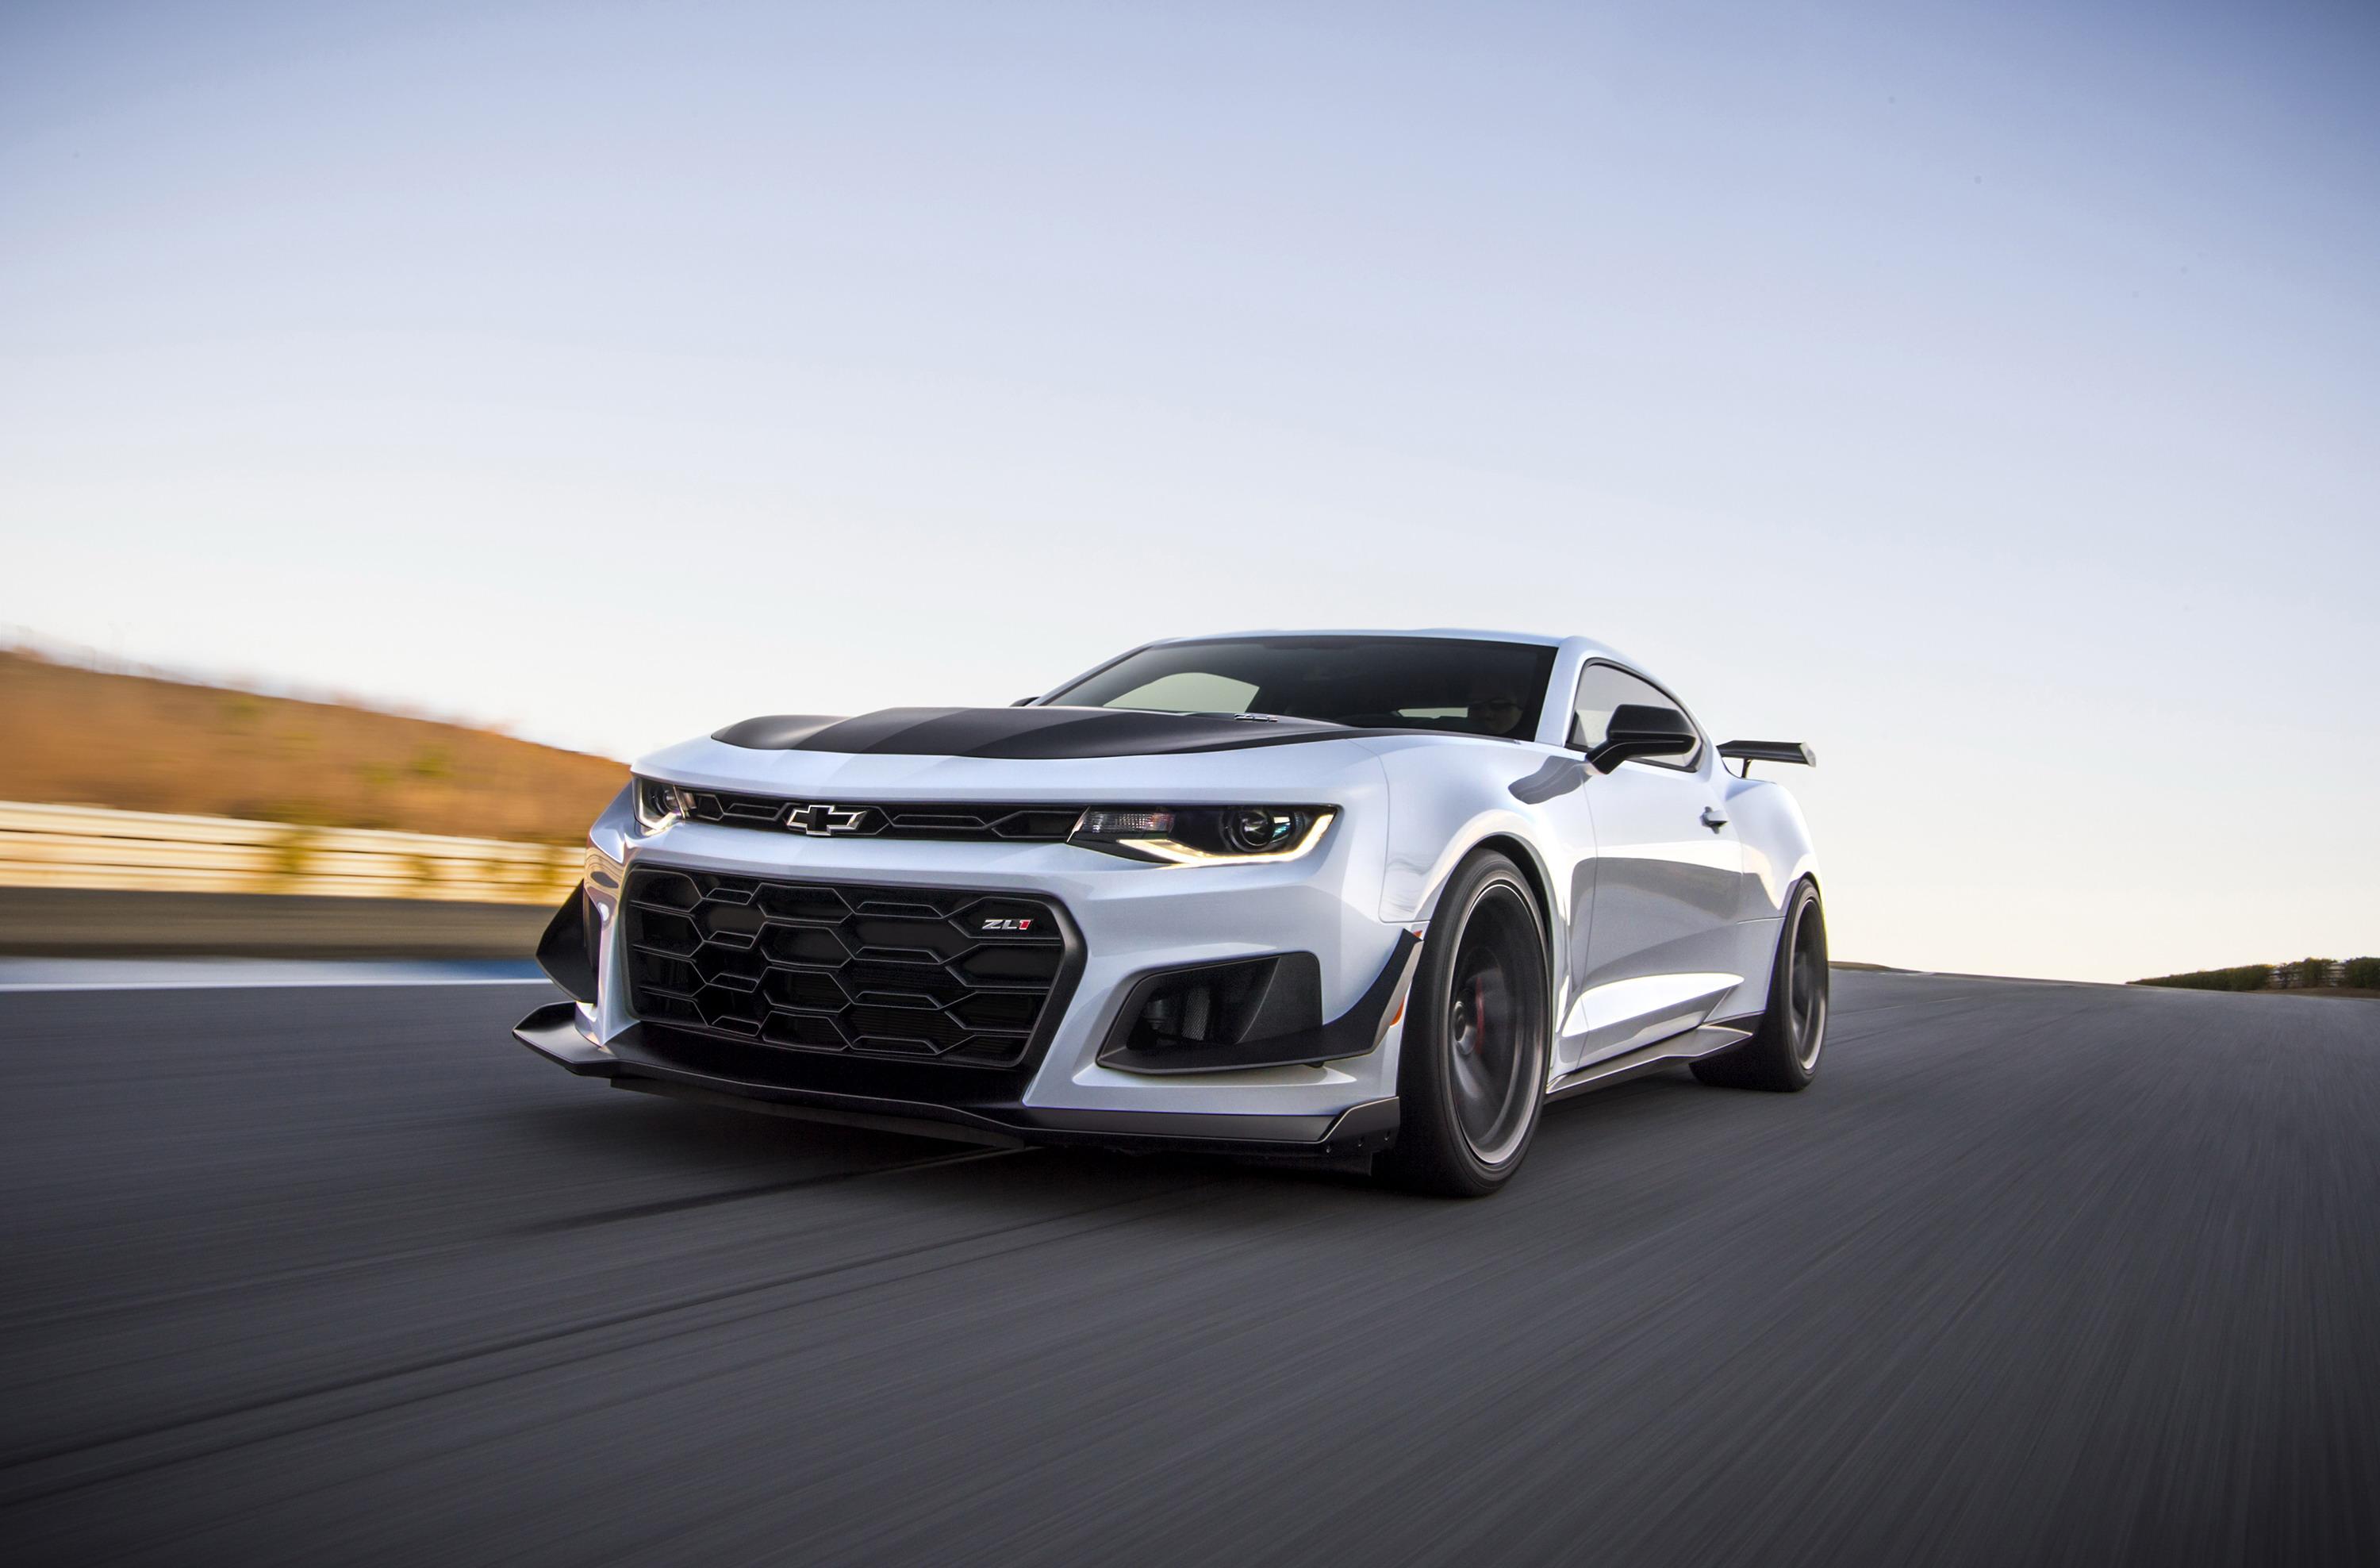 Wallpaper Of The Day: 2019 Chevy Camaro ZL1 1LE